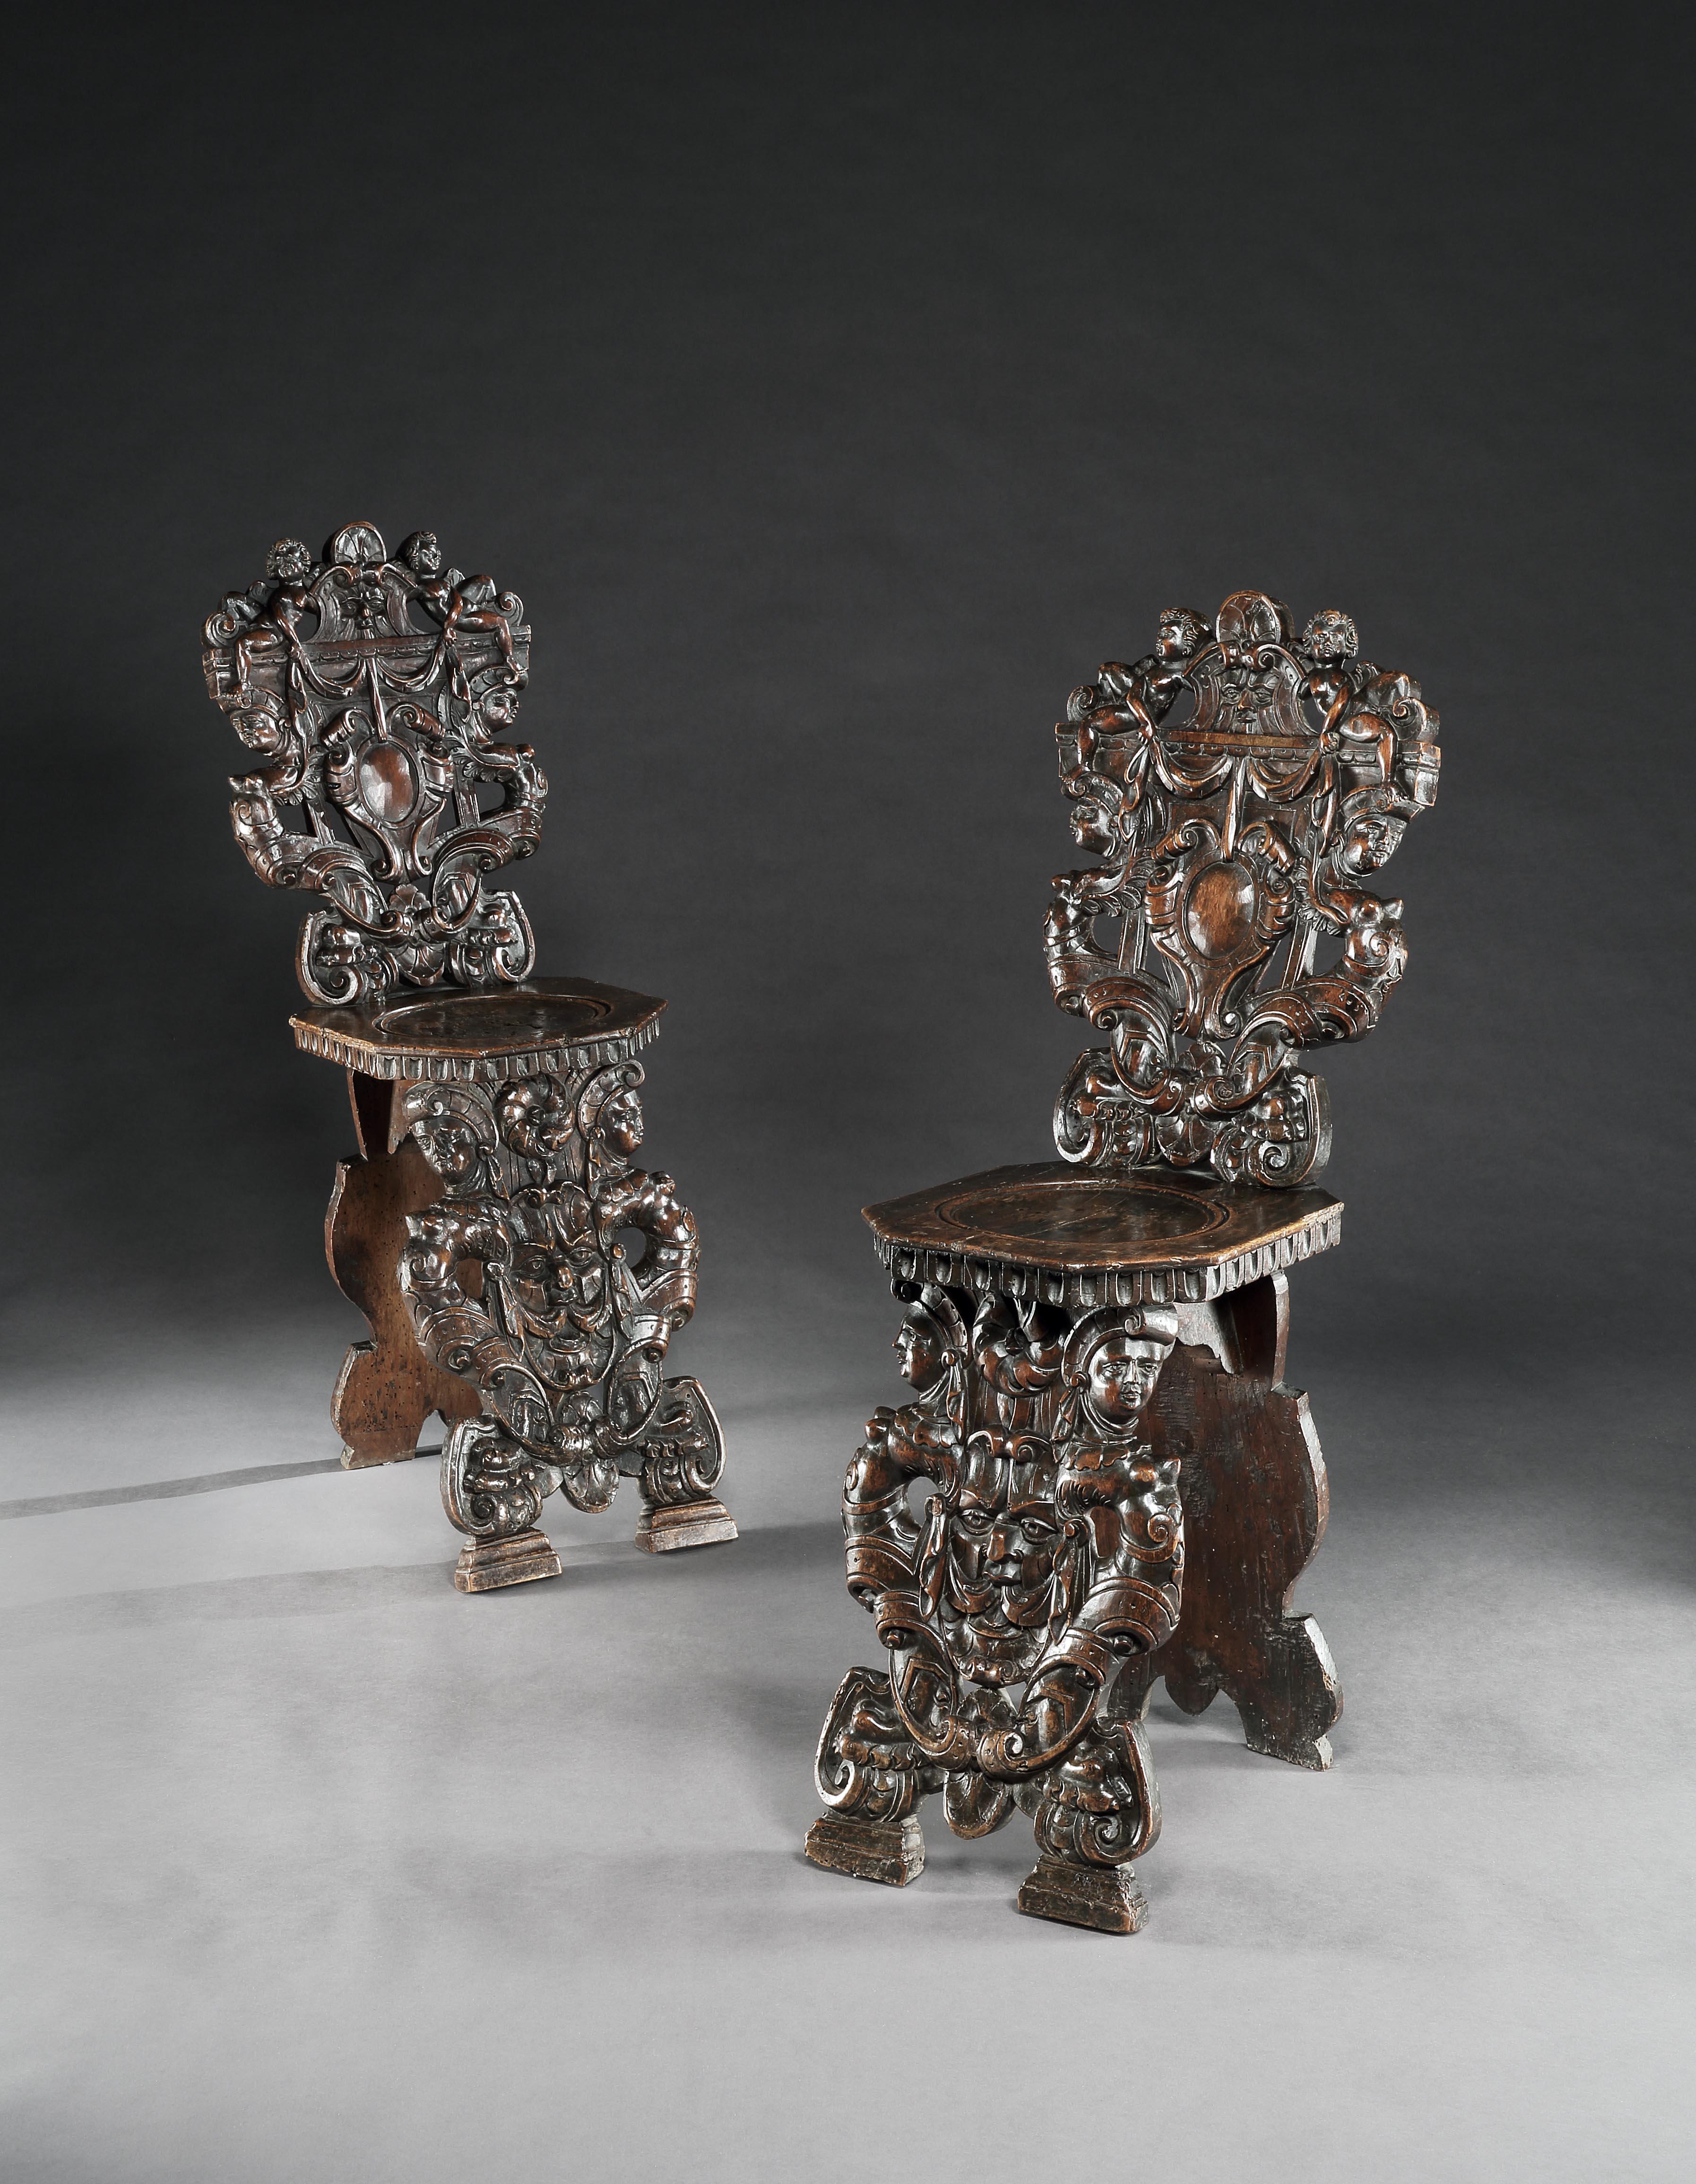 The quality of these exhuberant backstools demonstrate why Italian Renaissance furniture was as highly prized as old-master paintings. They were associated with Venice and the design was disseminated throughout Europe in the late-16th century. Known